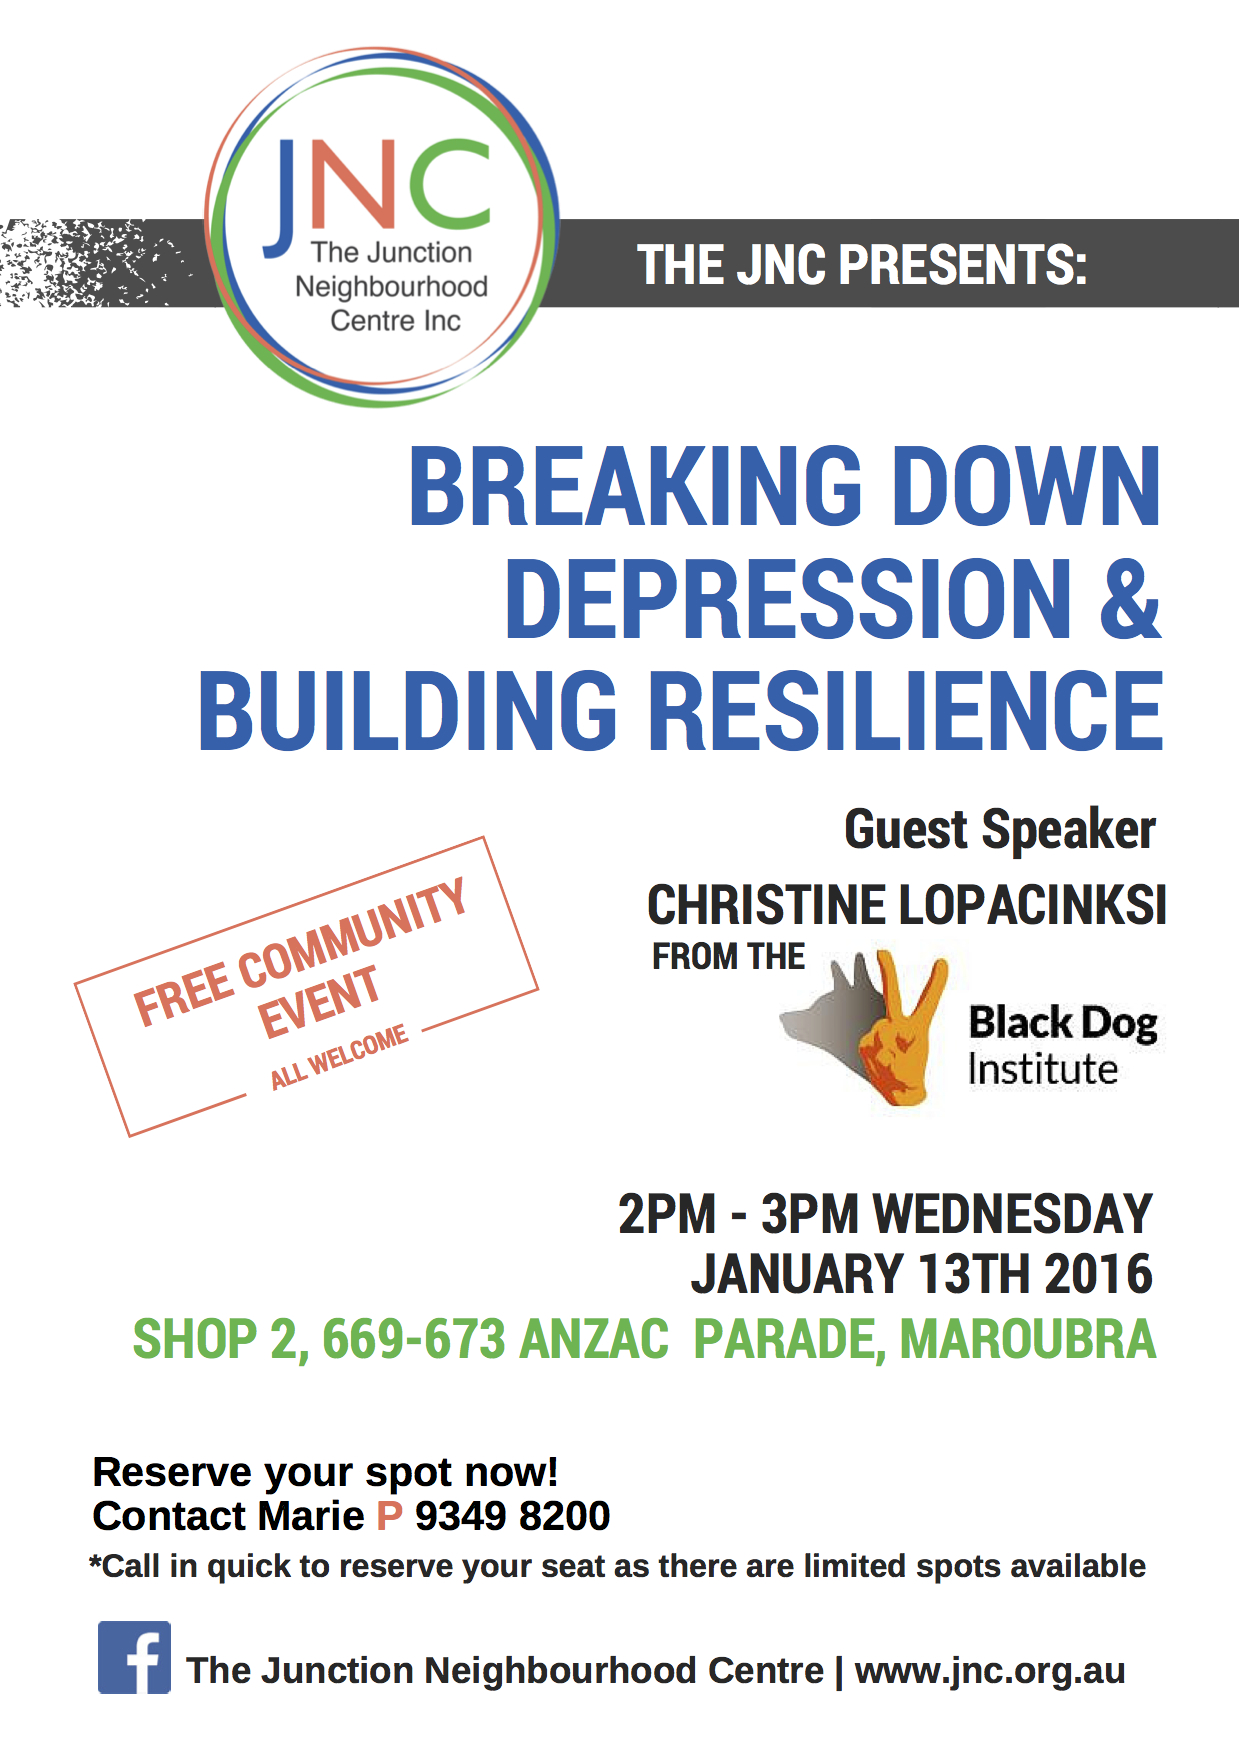 The JNC is running a free community workshop on depression and resilience on Wed 13 Jan 2016 in Maroubra.